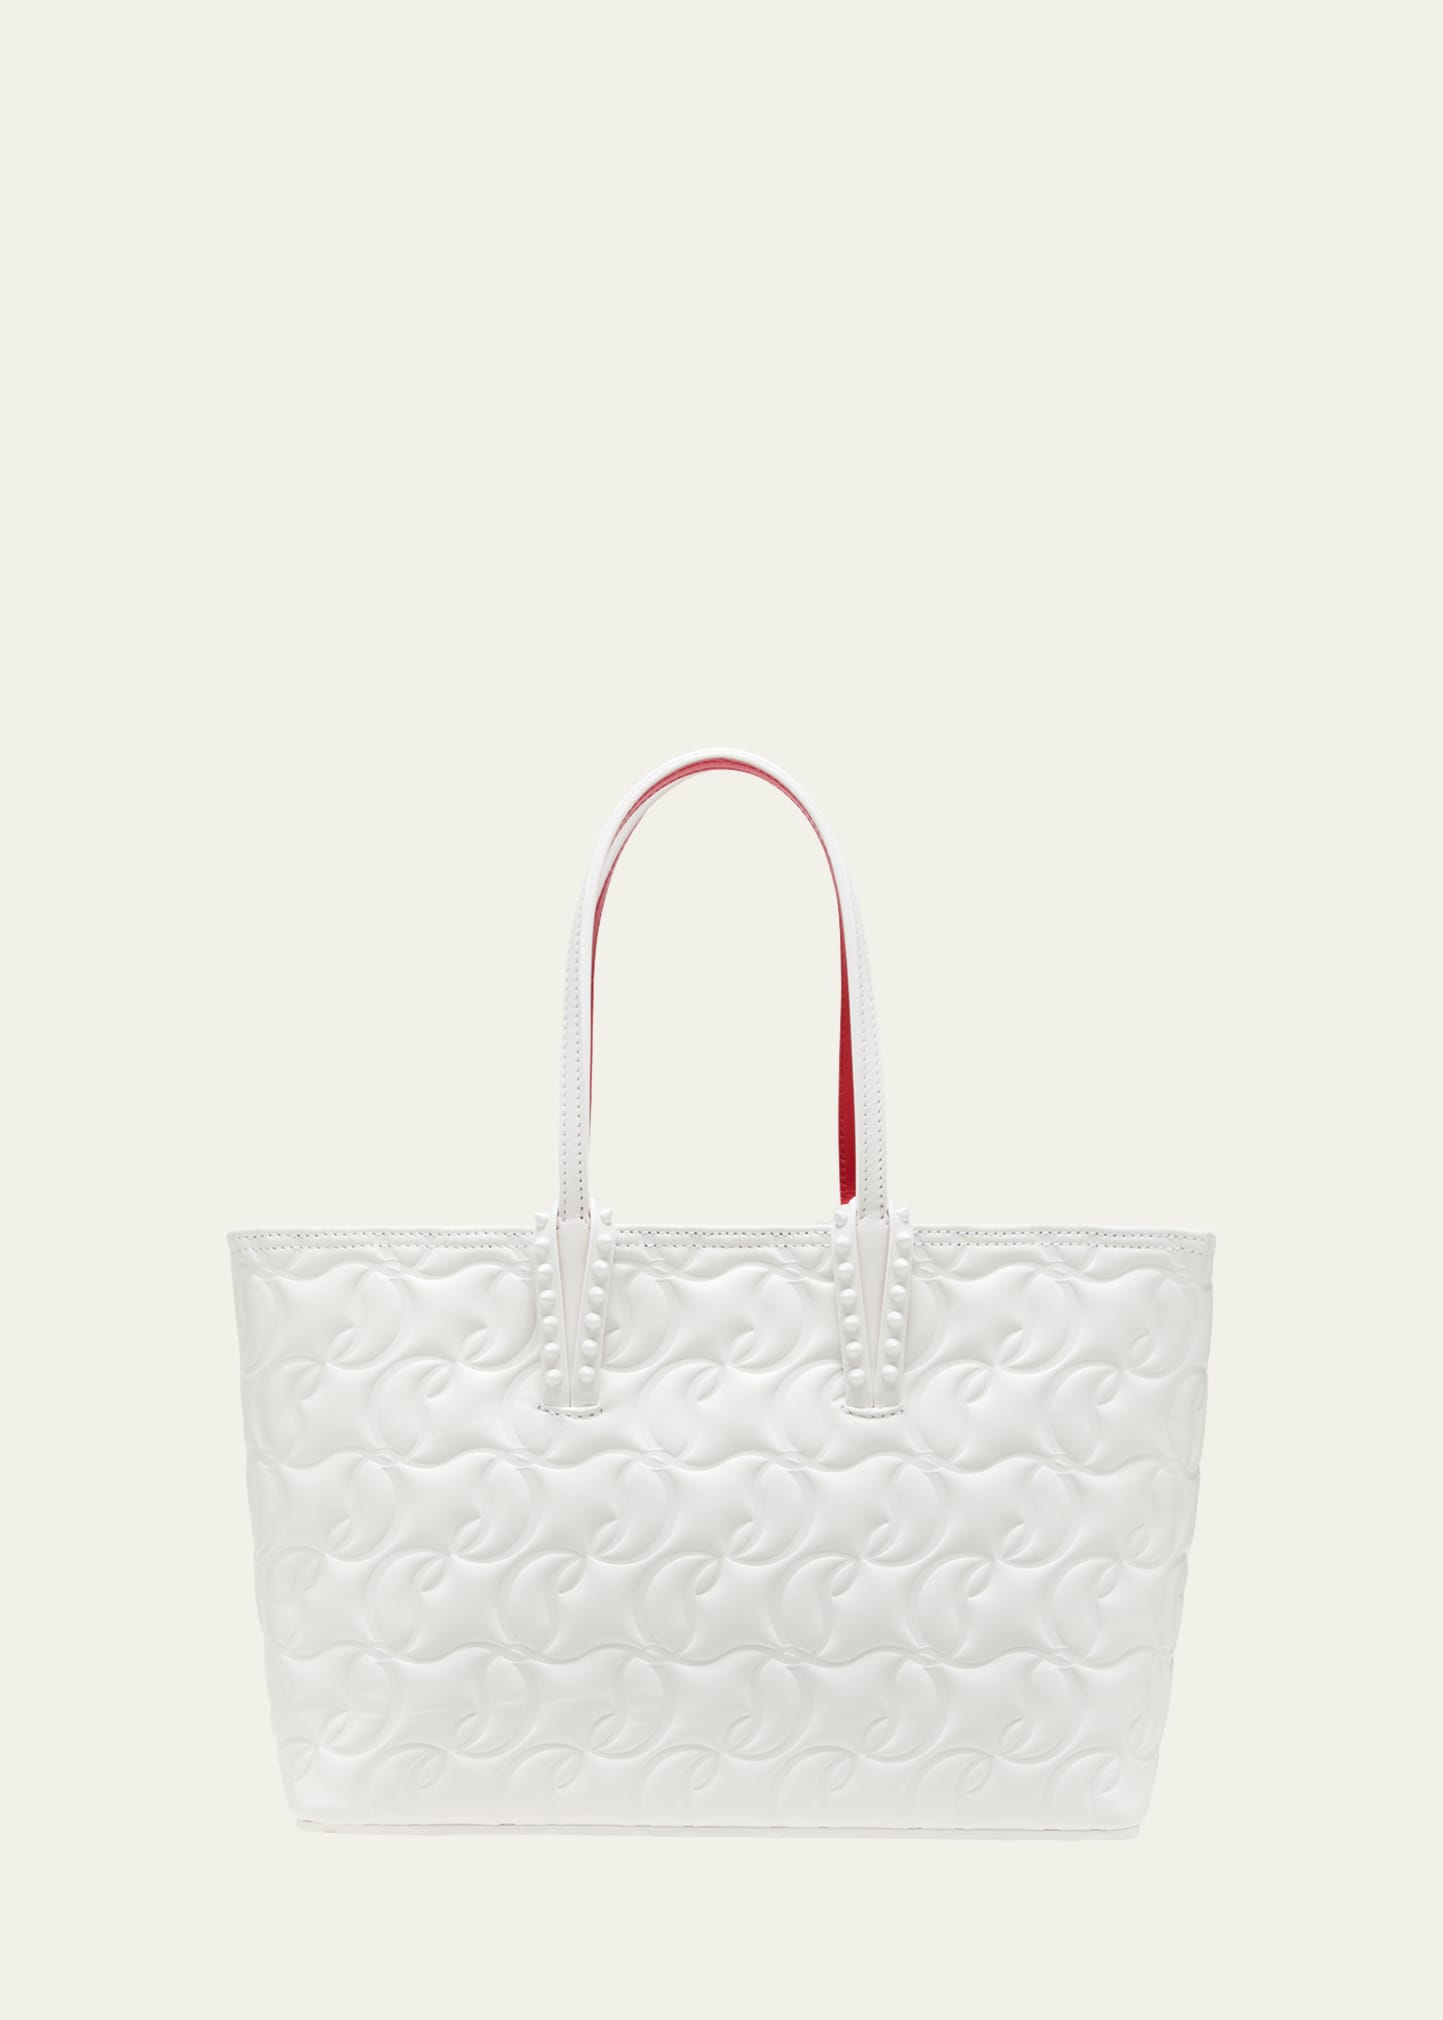 Cabata Small Tote in CL Embossed Nappa Leather